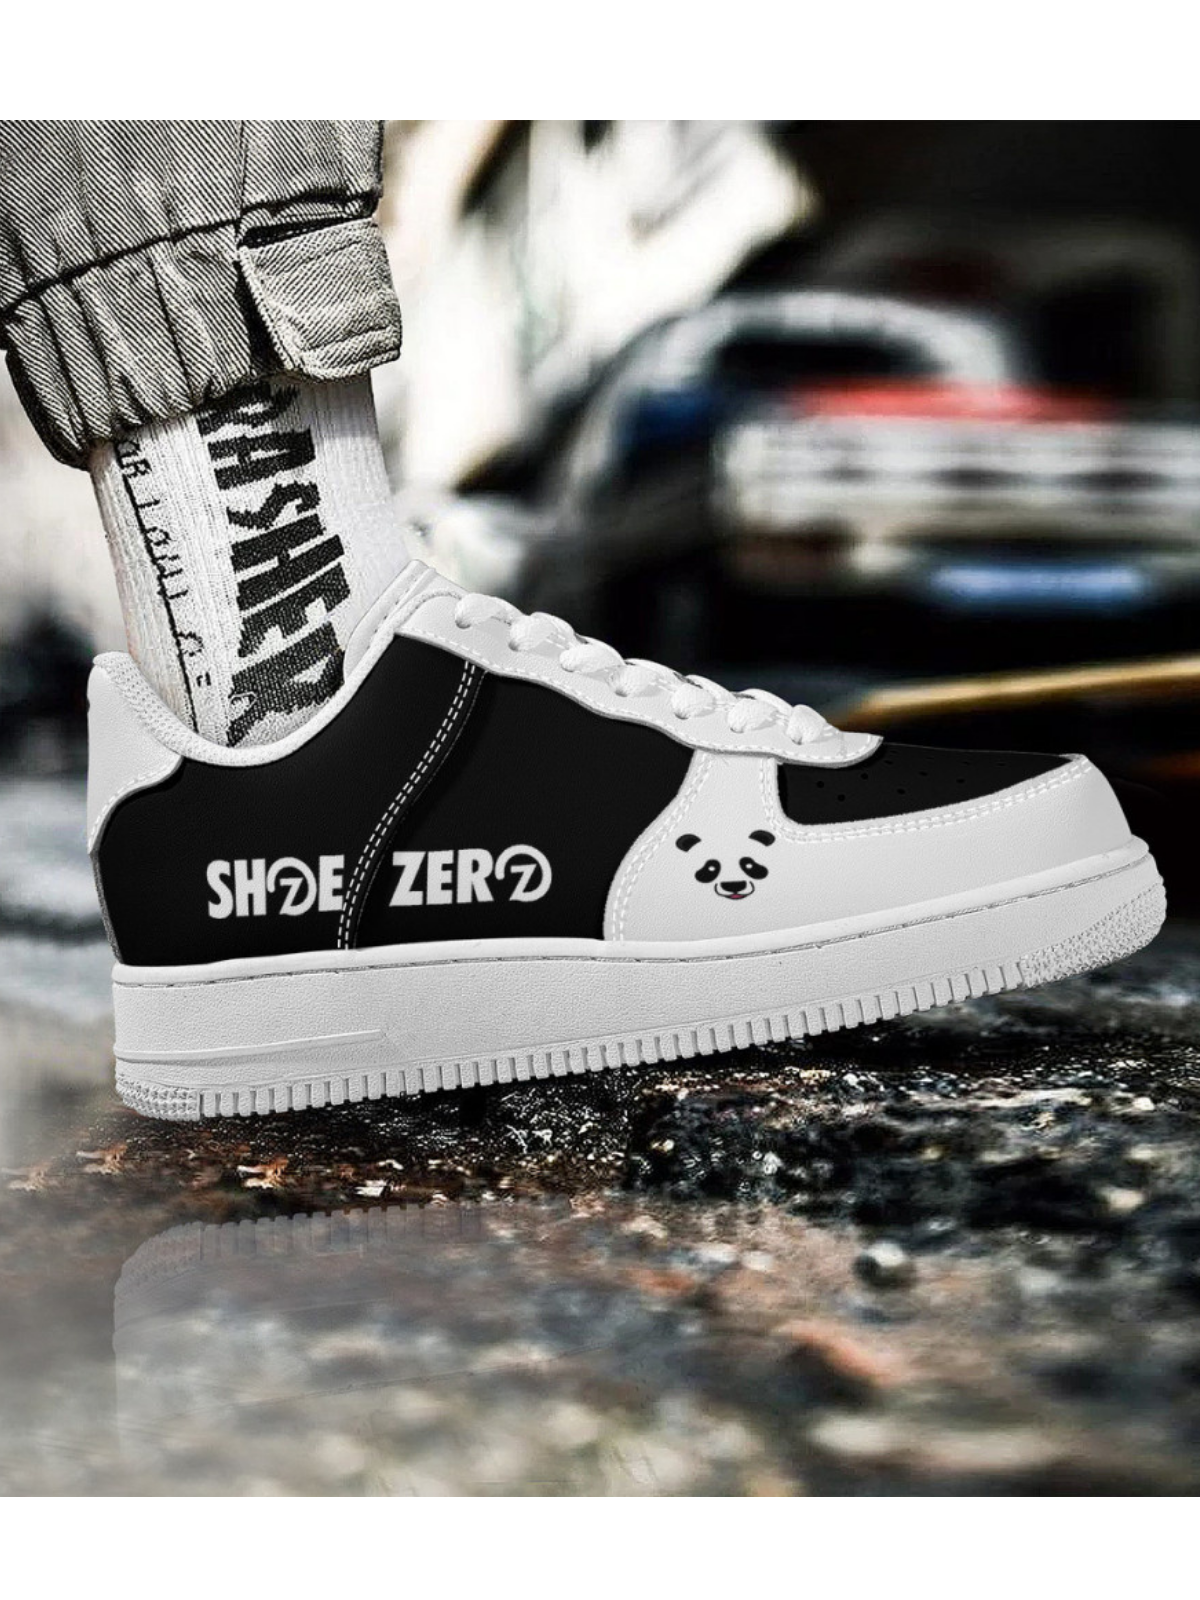 Shoe Zero | Create Your Own Custom Shoes | Upload Any Design Element